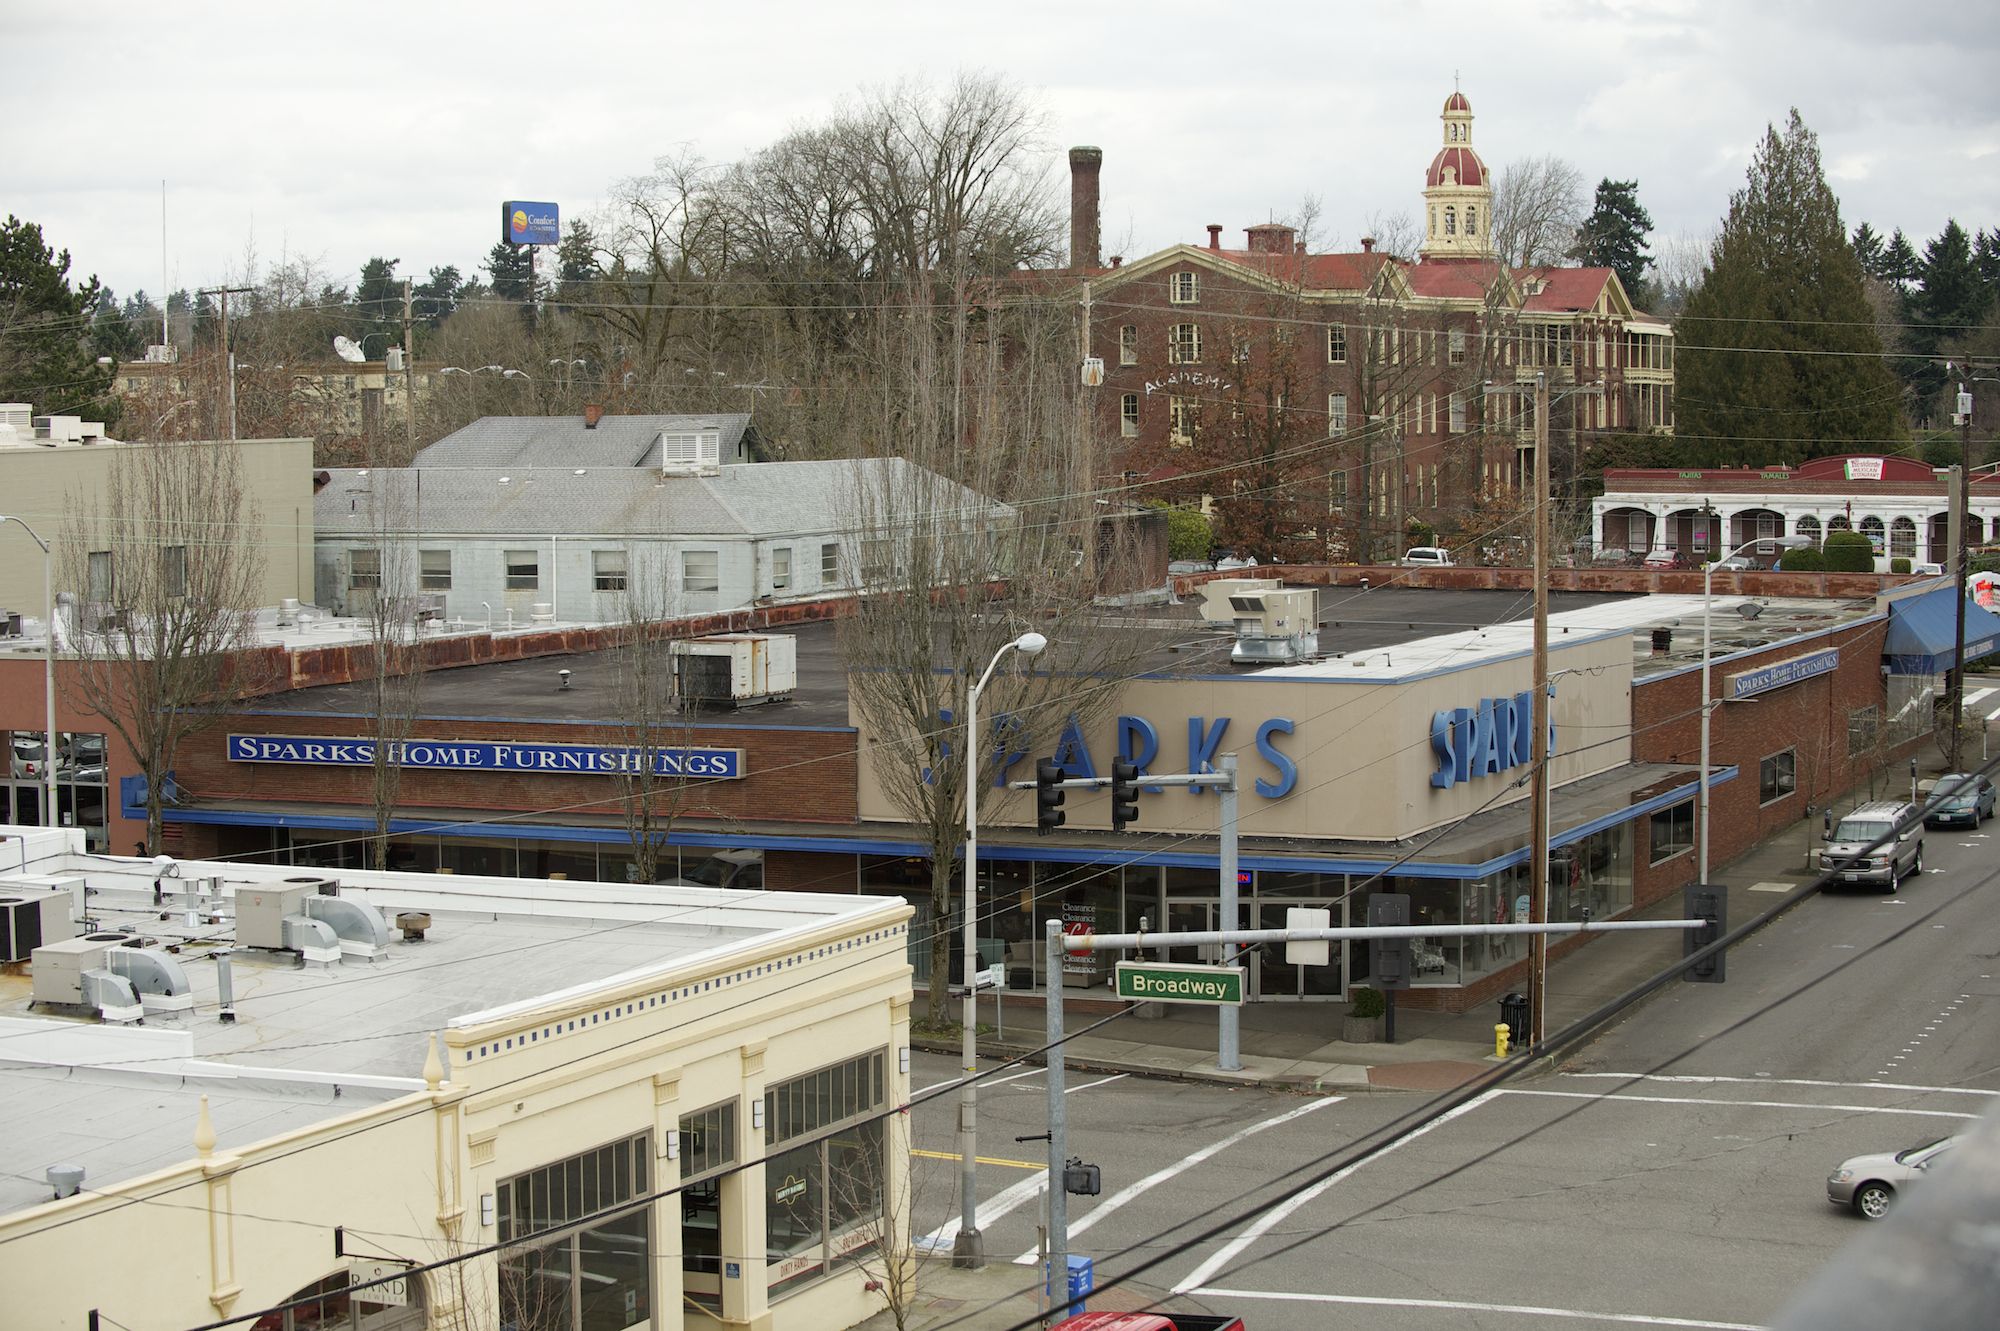 The Sparks Home Furnishings site is across from the historic Academy building, in the background, now the subject of a $10.6 million purchase and restoration campaign, and also is close to Vancouver's new public library (not shown).